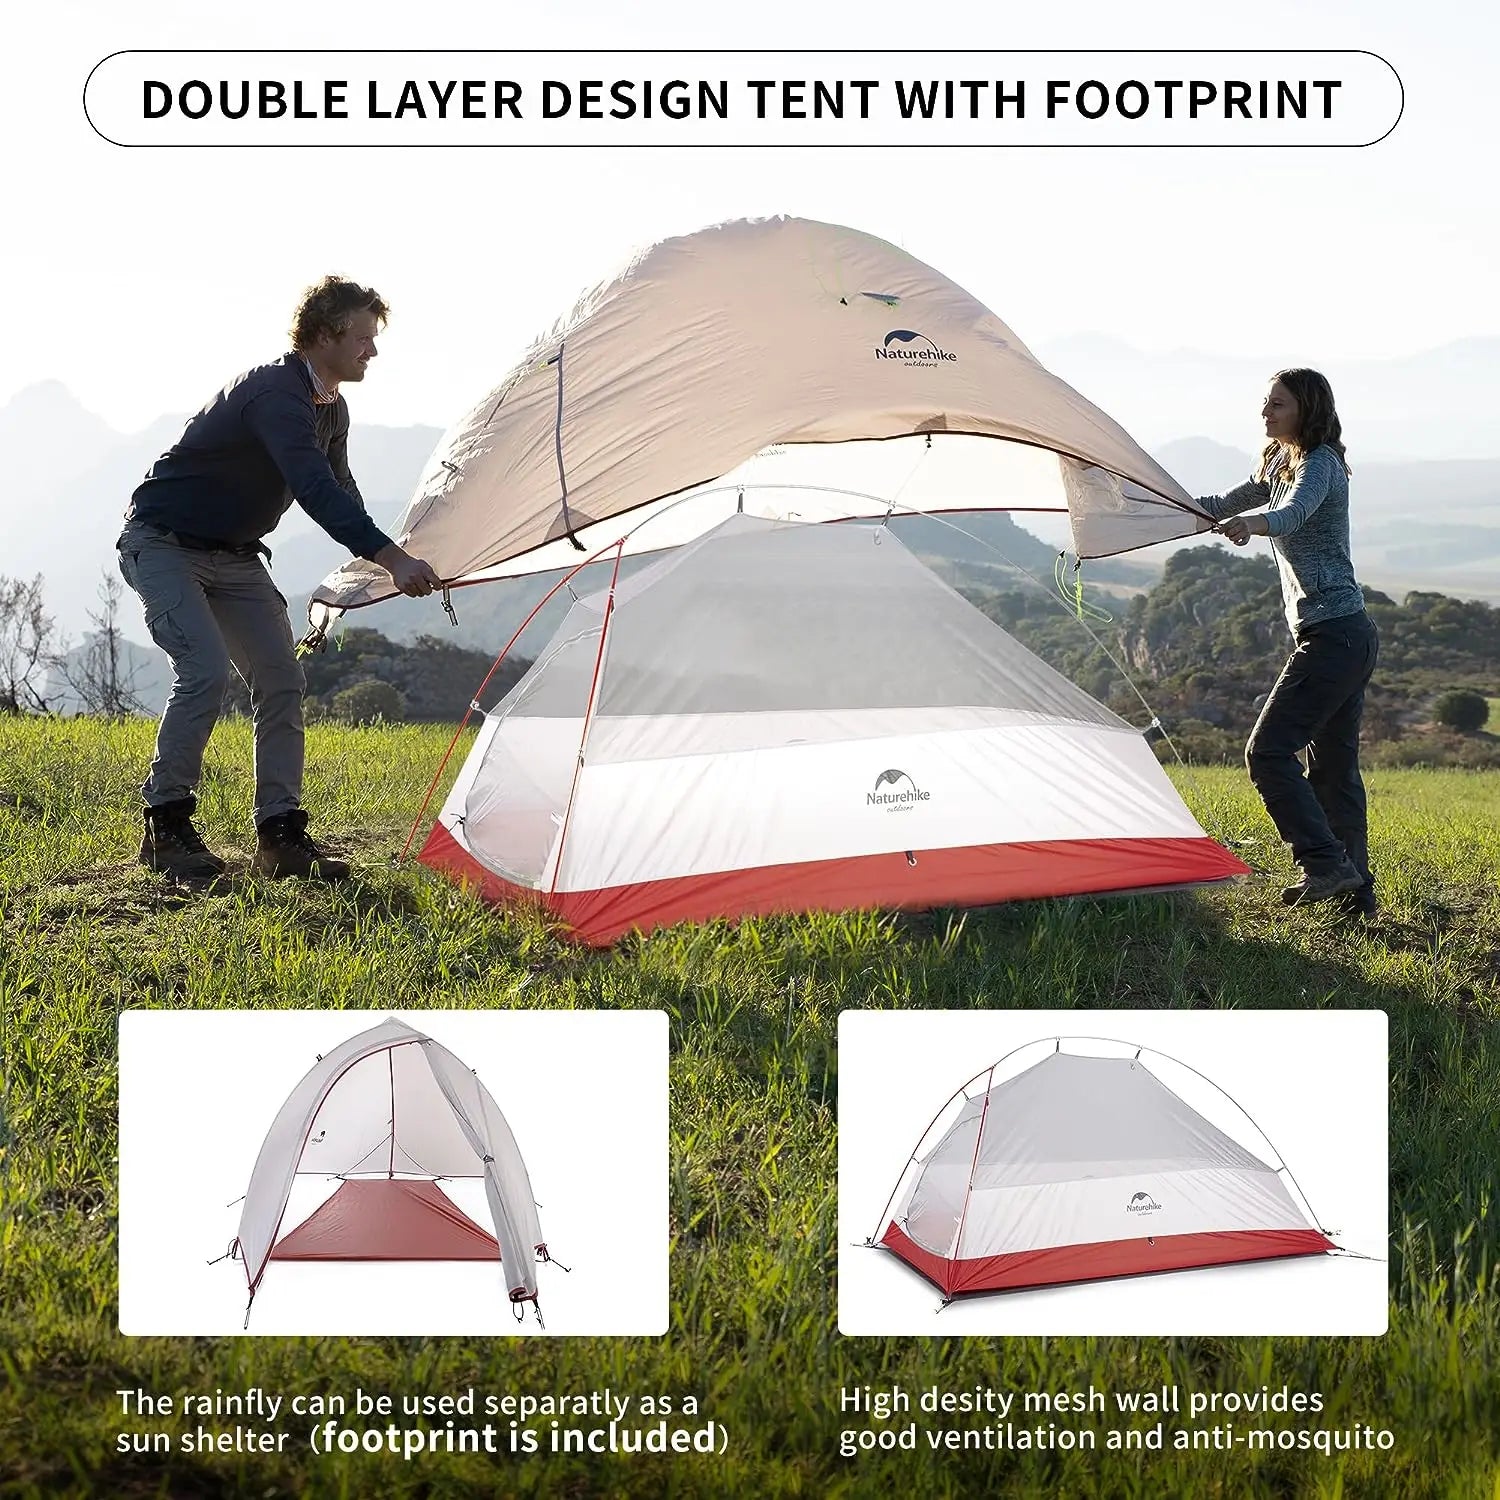 Flayboard™ Naturehike Ultralight Cloud Up 1-Person Camping Tent